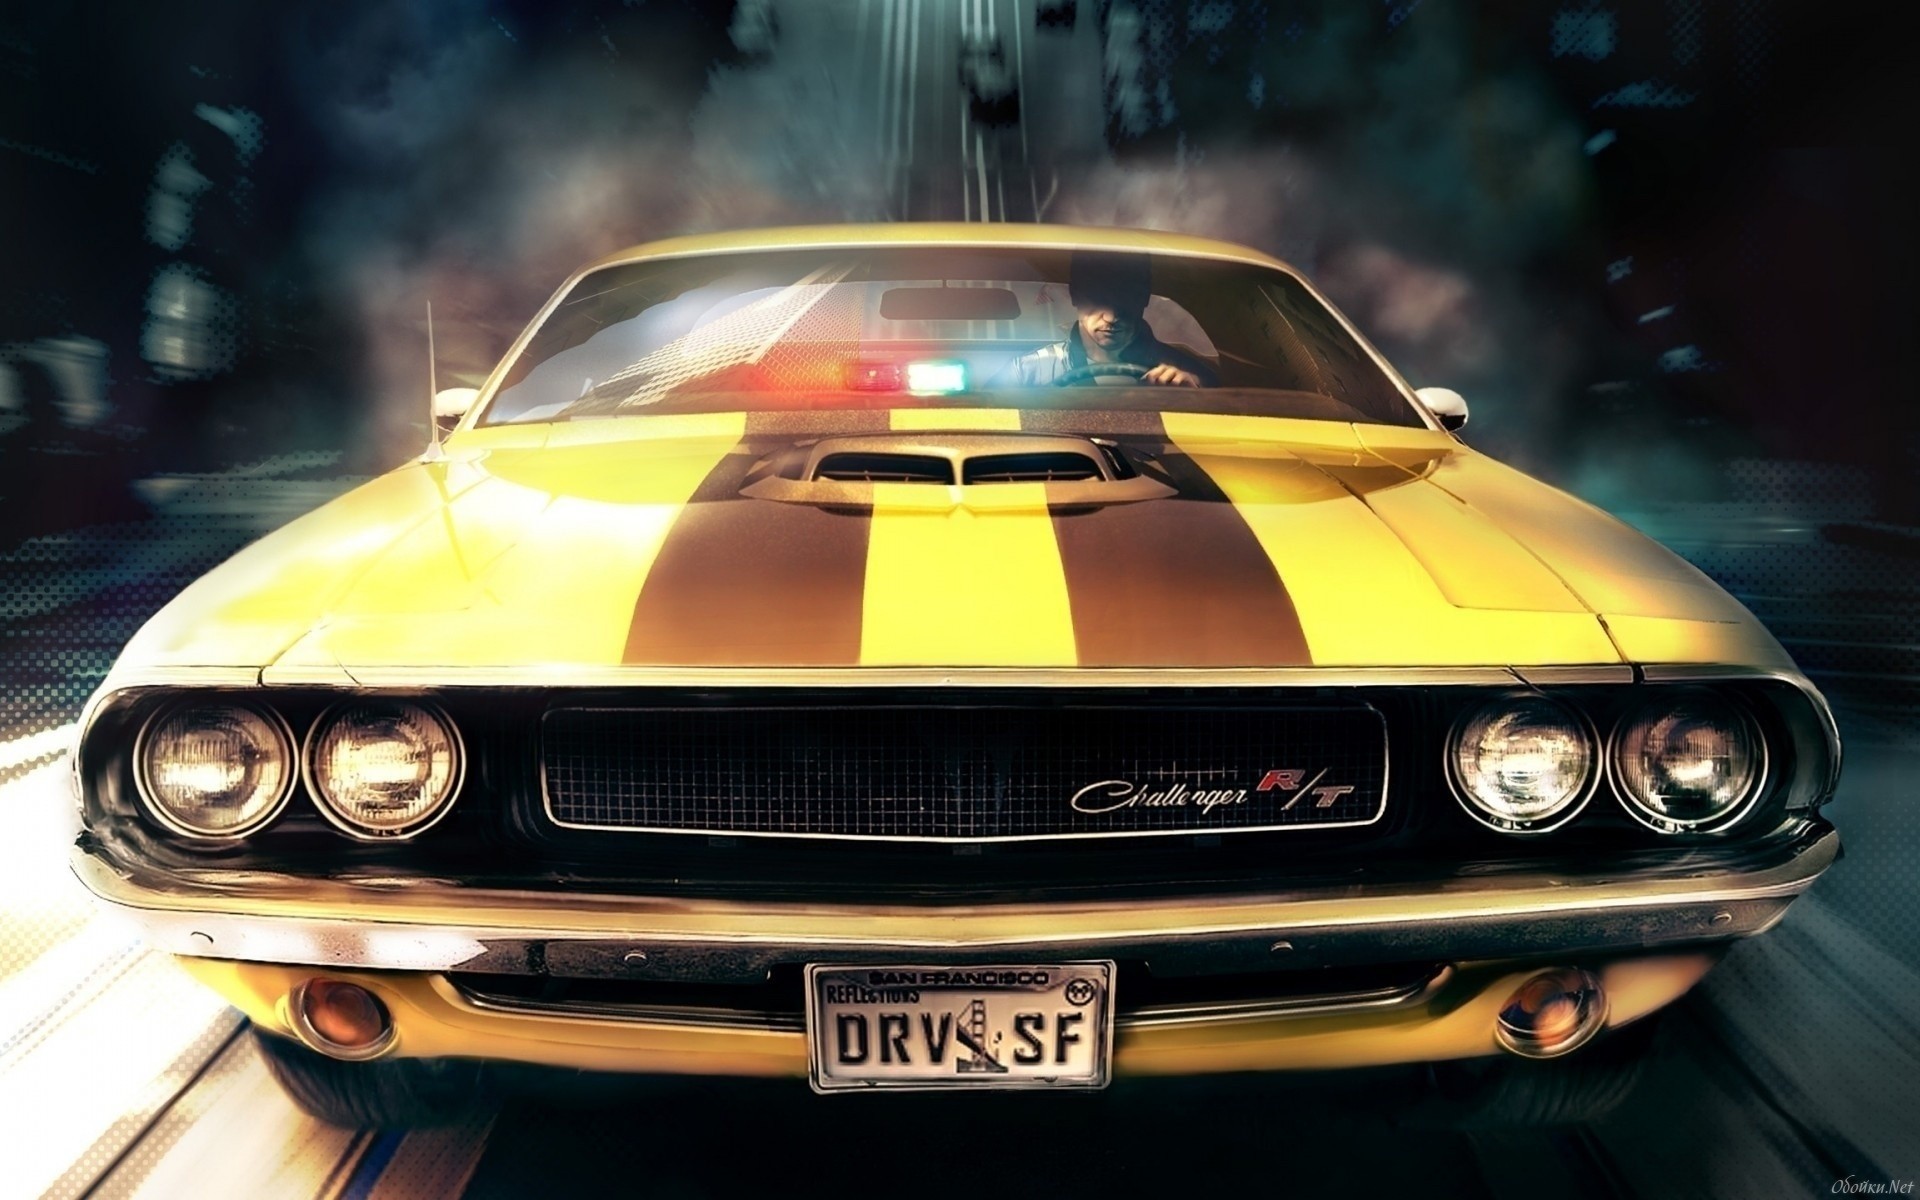 Driver San Francisco Driver Video Game Dodge Challenger Challenger Racing Stripes Frontal View 1920x1200